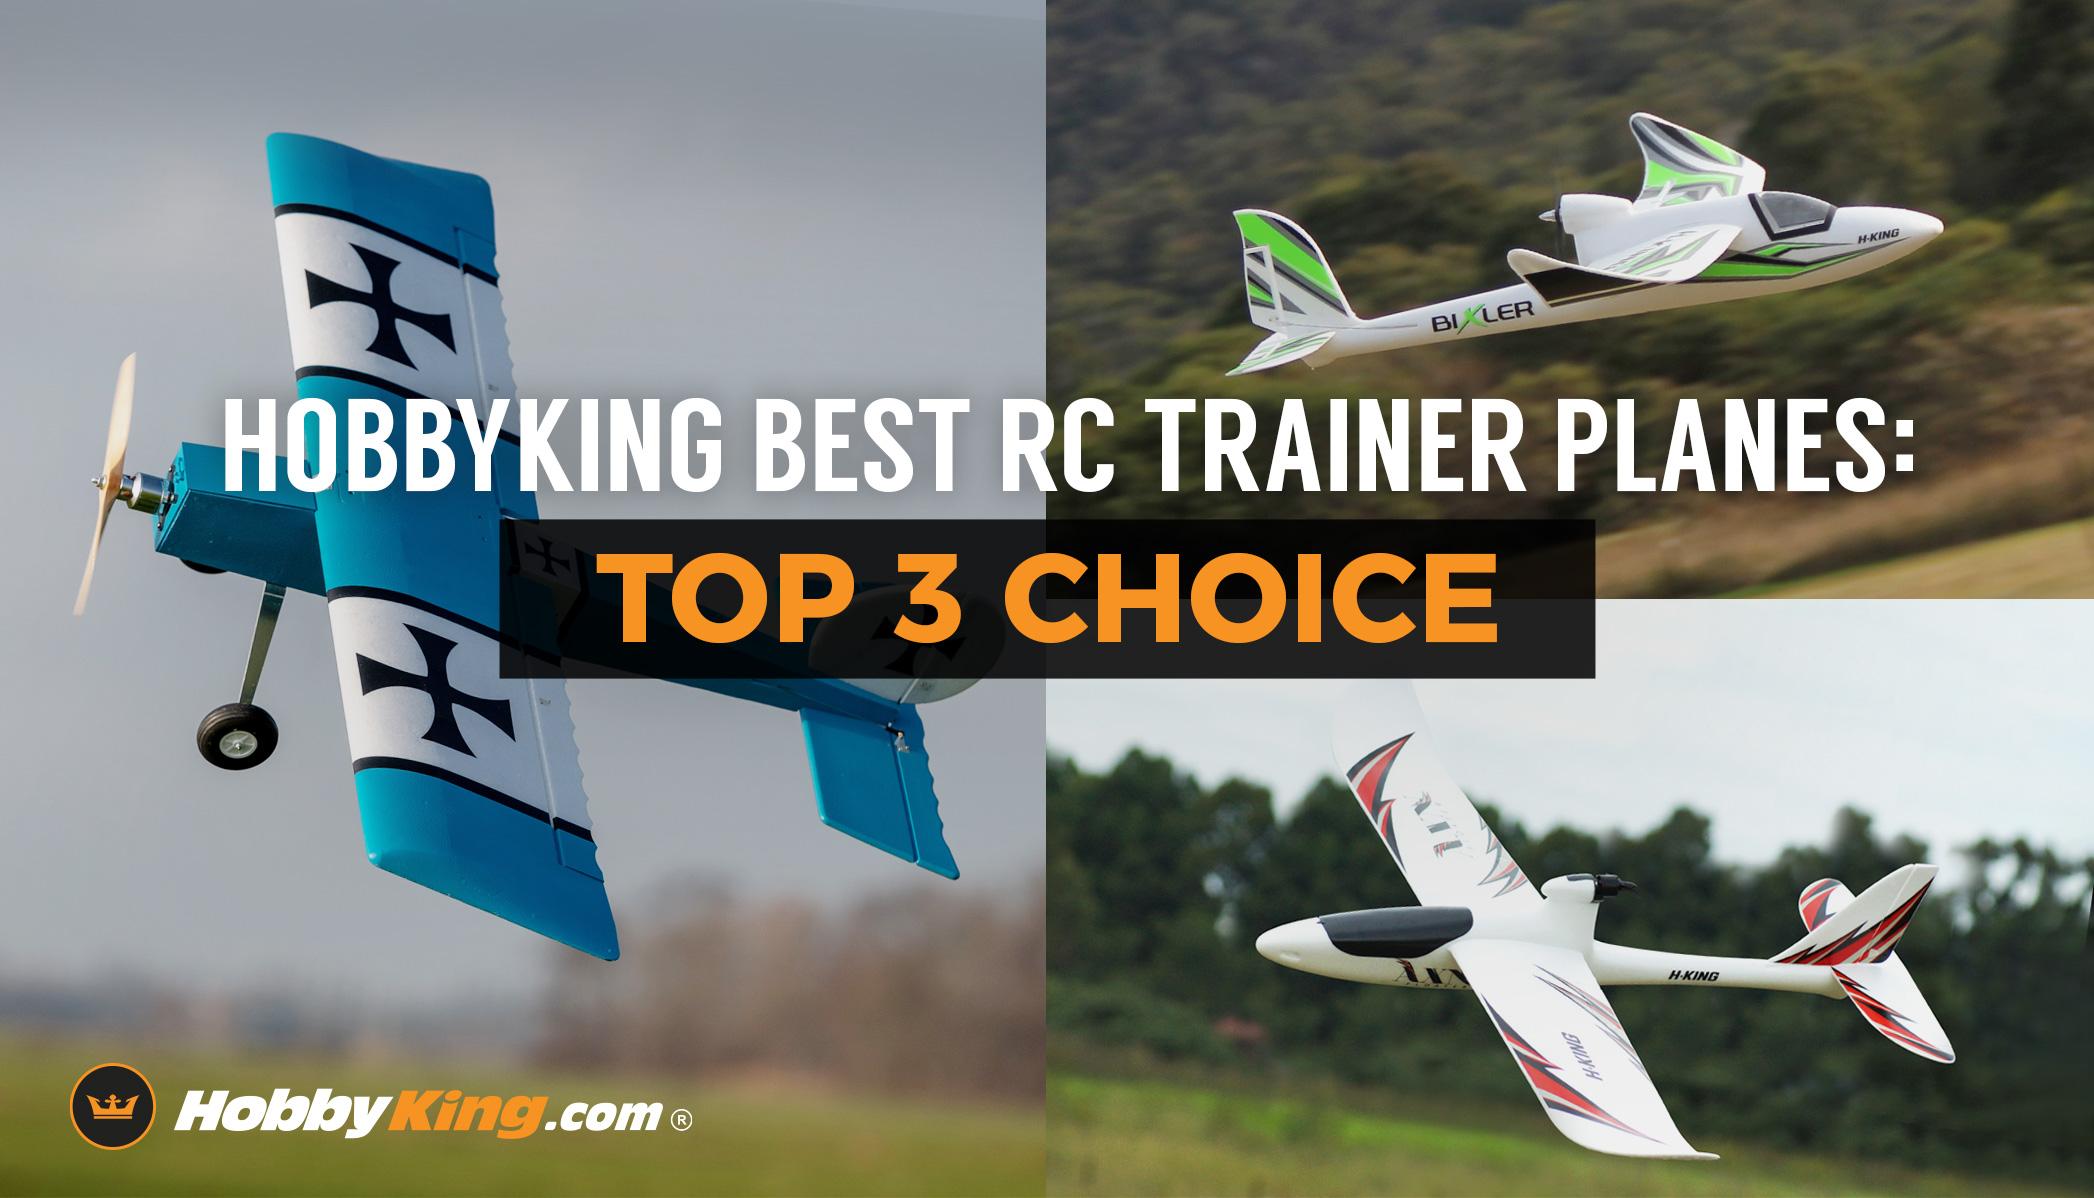 Rc Jet Trainer: Benefits of Owning an RC Jet Trainer